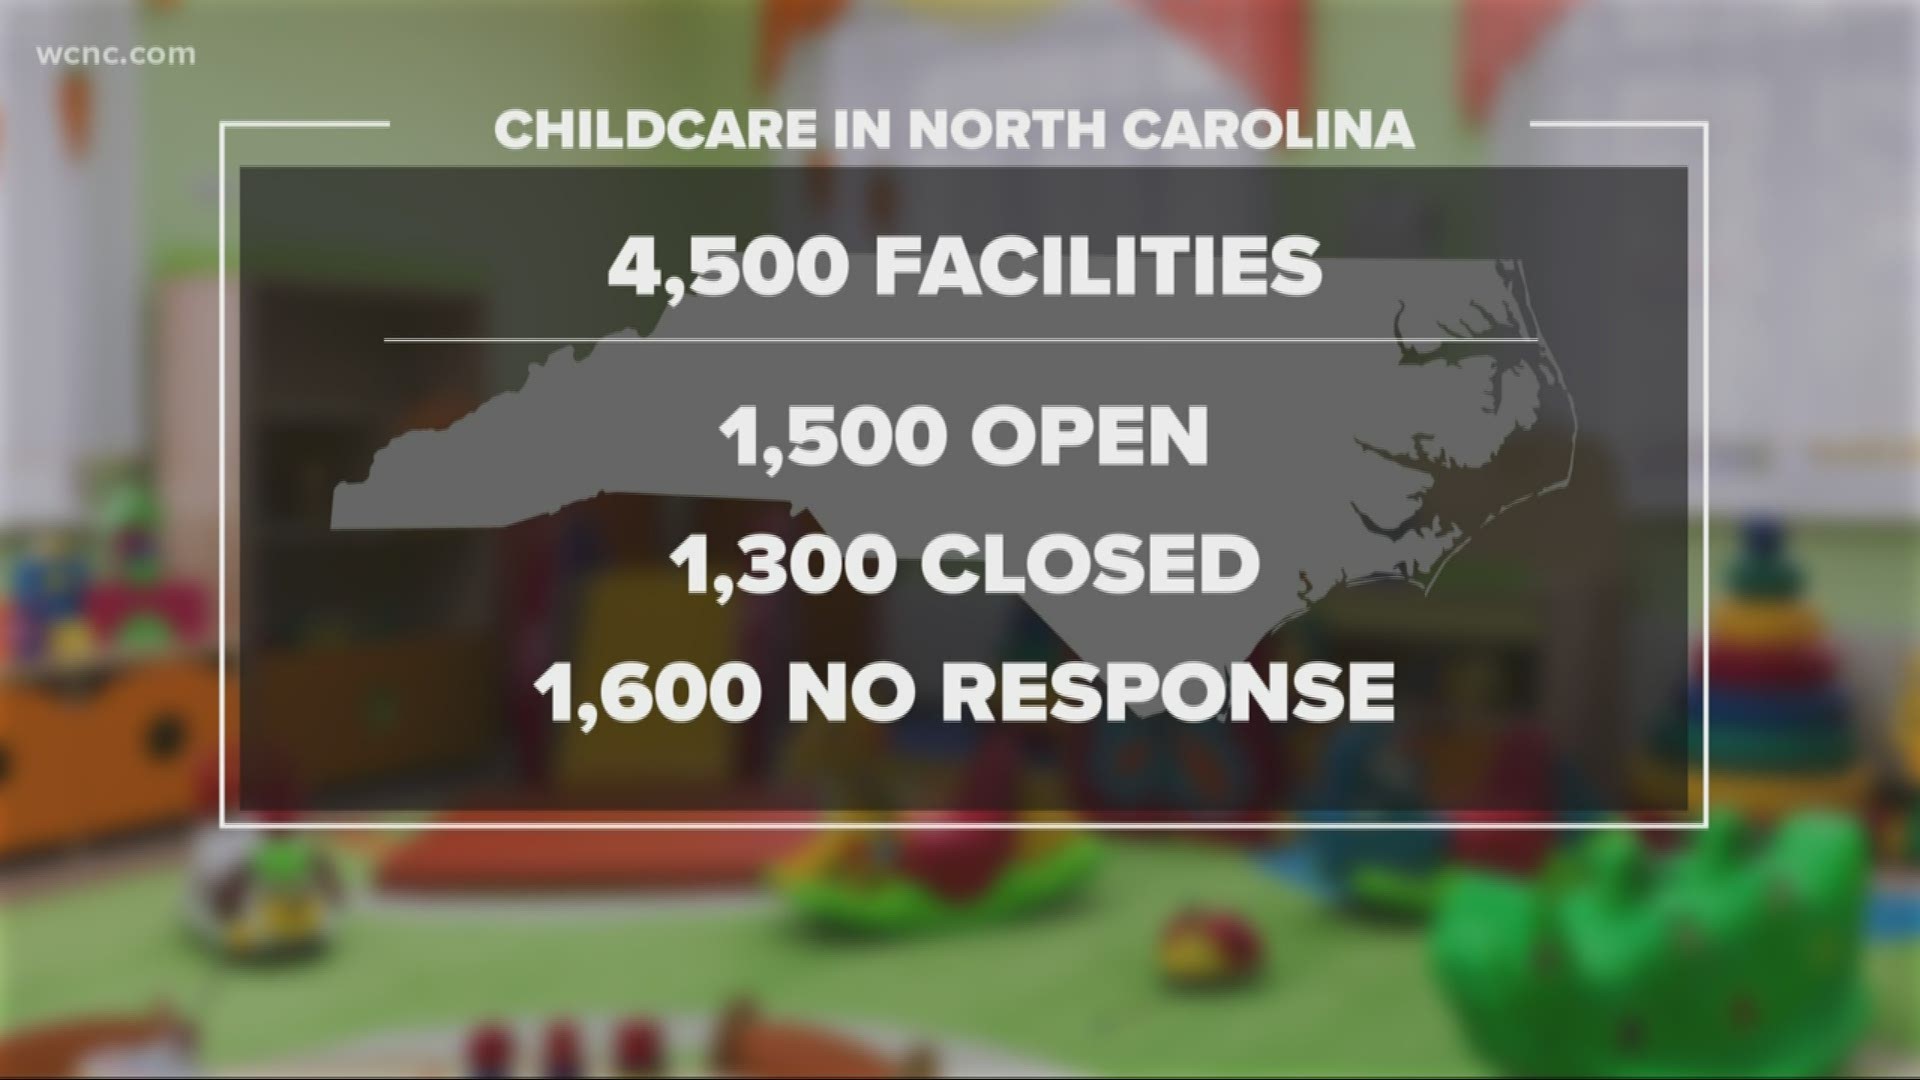 Officials are considering childcare centers specifically for the children of those who are on the frontlines of the COVID-19 pandemic, including first responders.